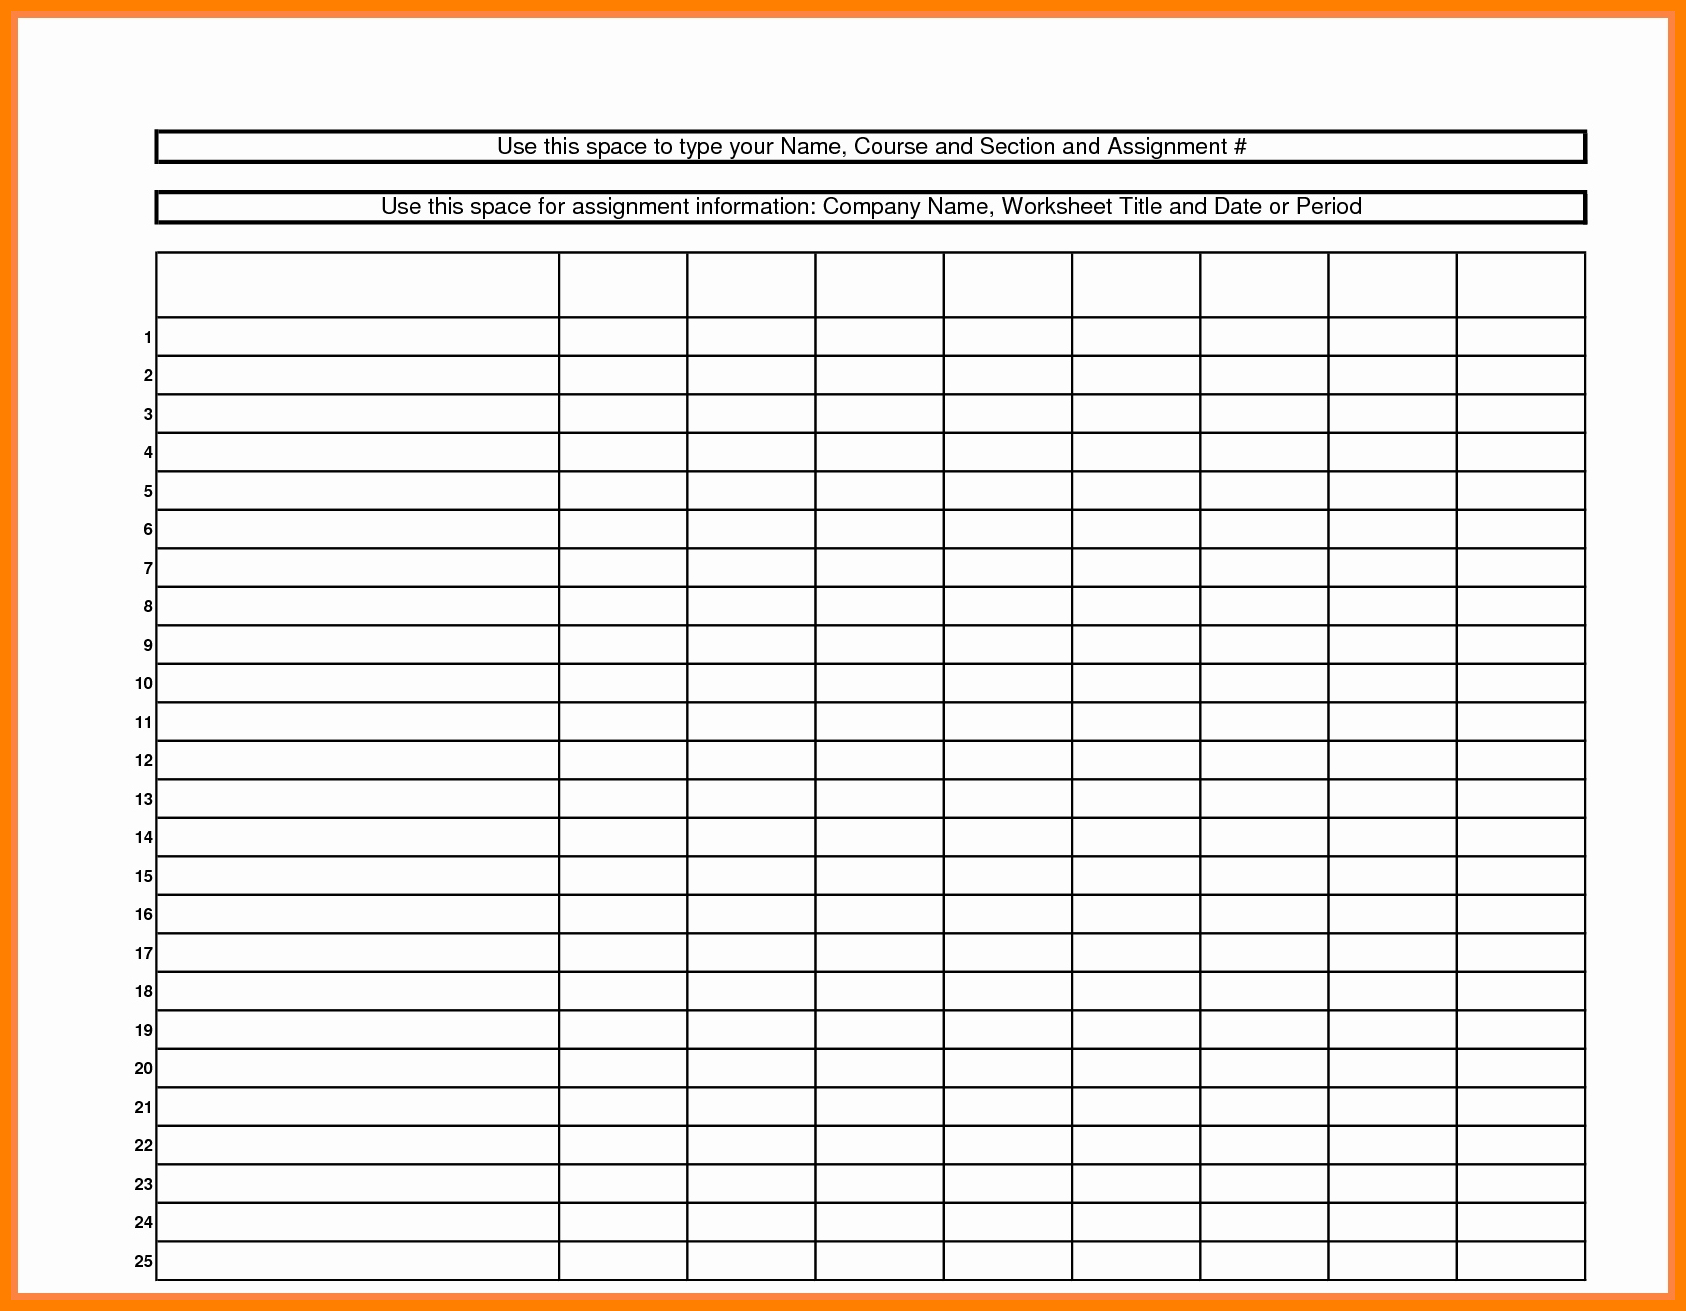 Spreadsheet Nk Online Excel Opens Checklist Template For Throughout Blank Checklist Template Pdf